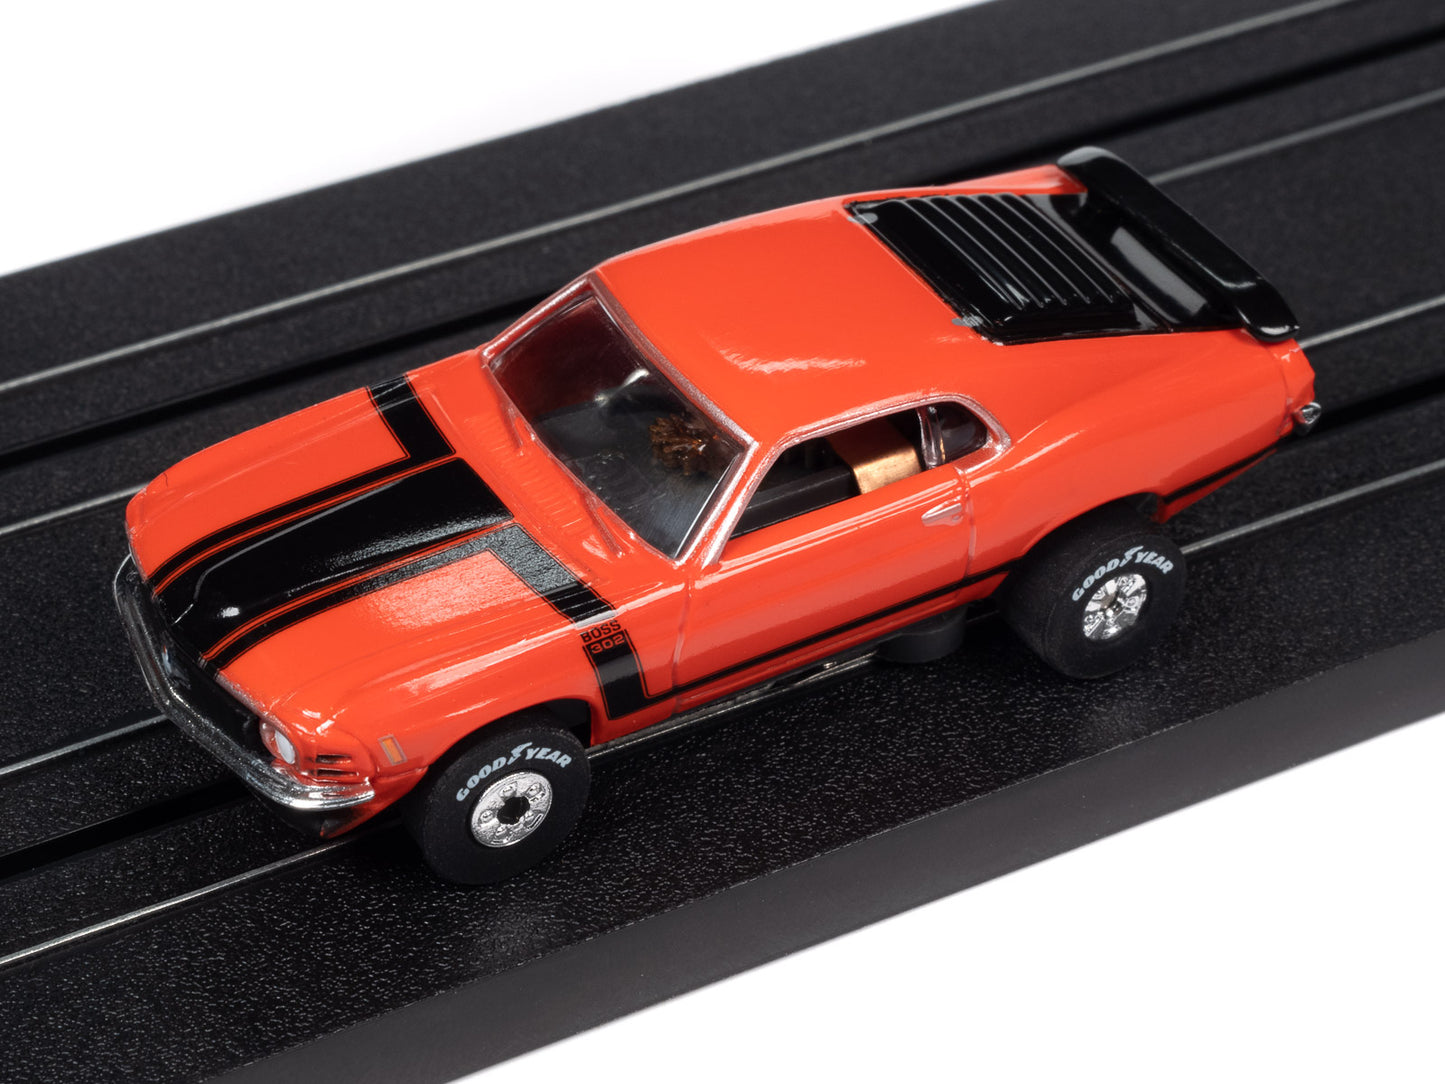 1970 Ford Mustang Boss 302 (Red) H.O. Scale Slot Car, ThunderJet Chassis